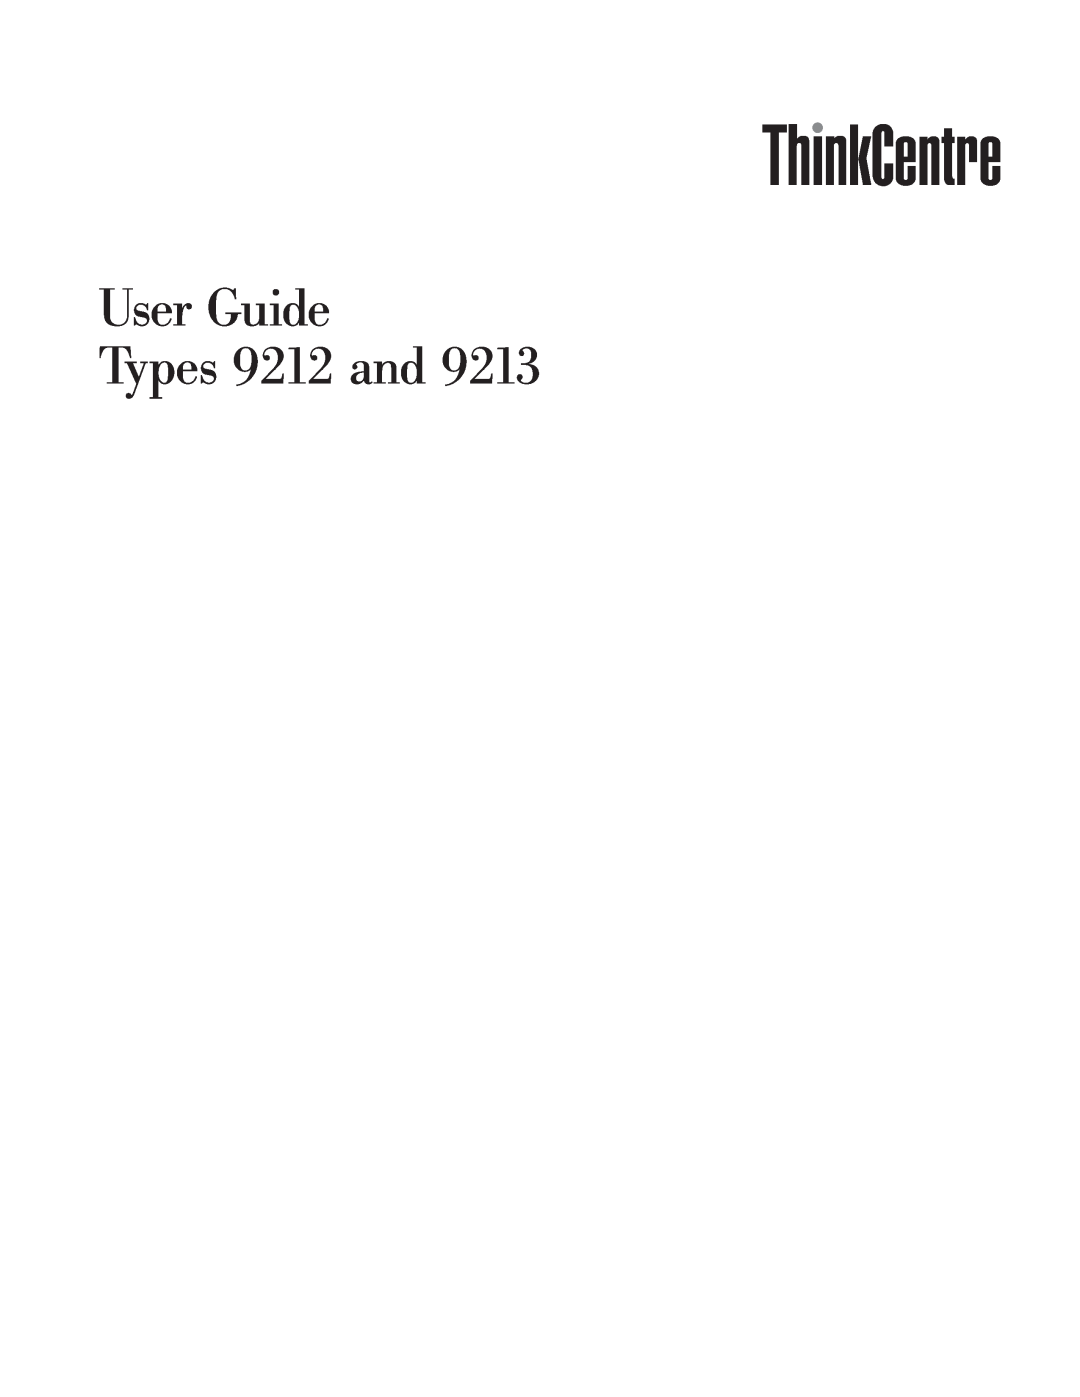 Lenovo 9213 manual User Guide Types 9212 and 